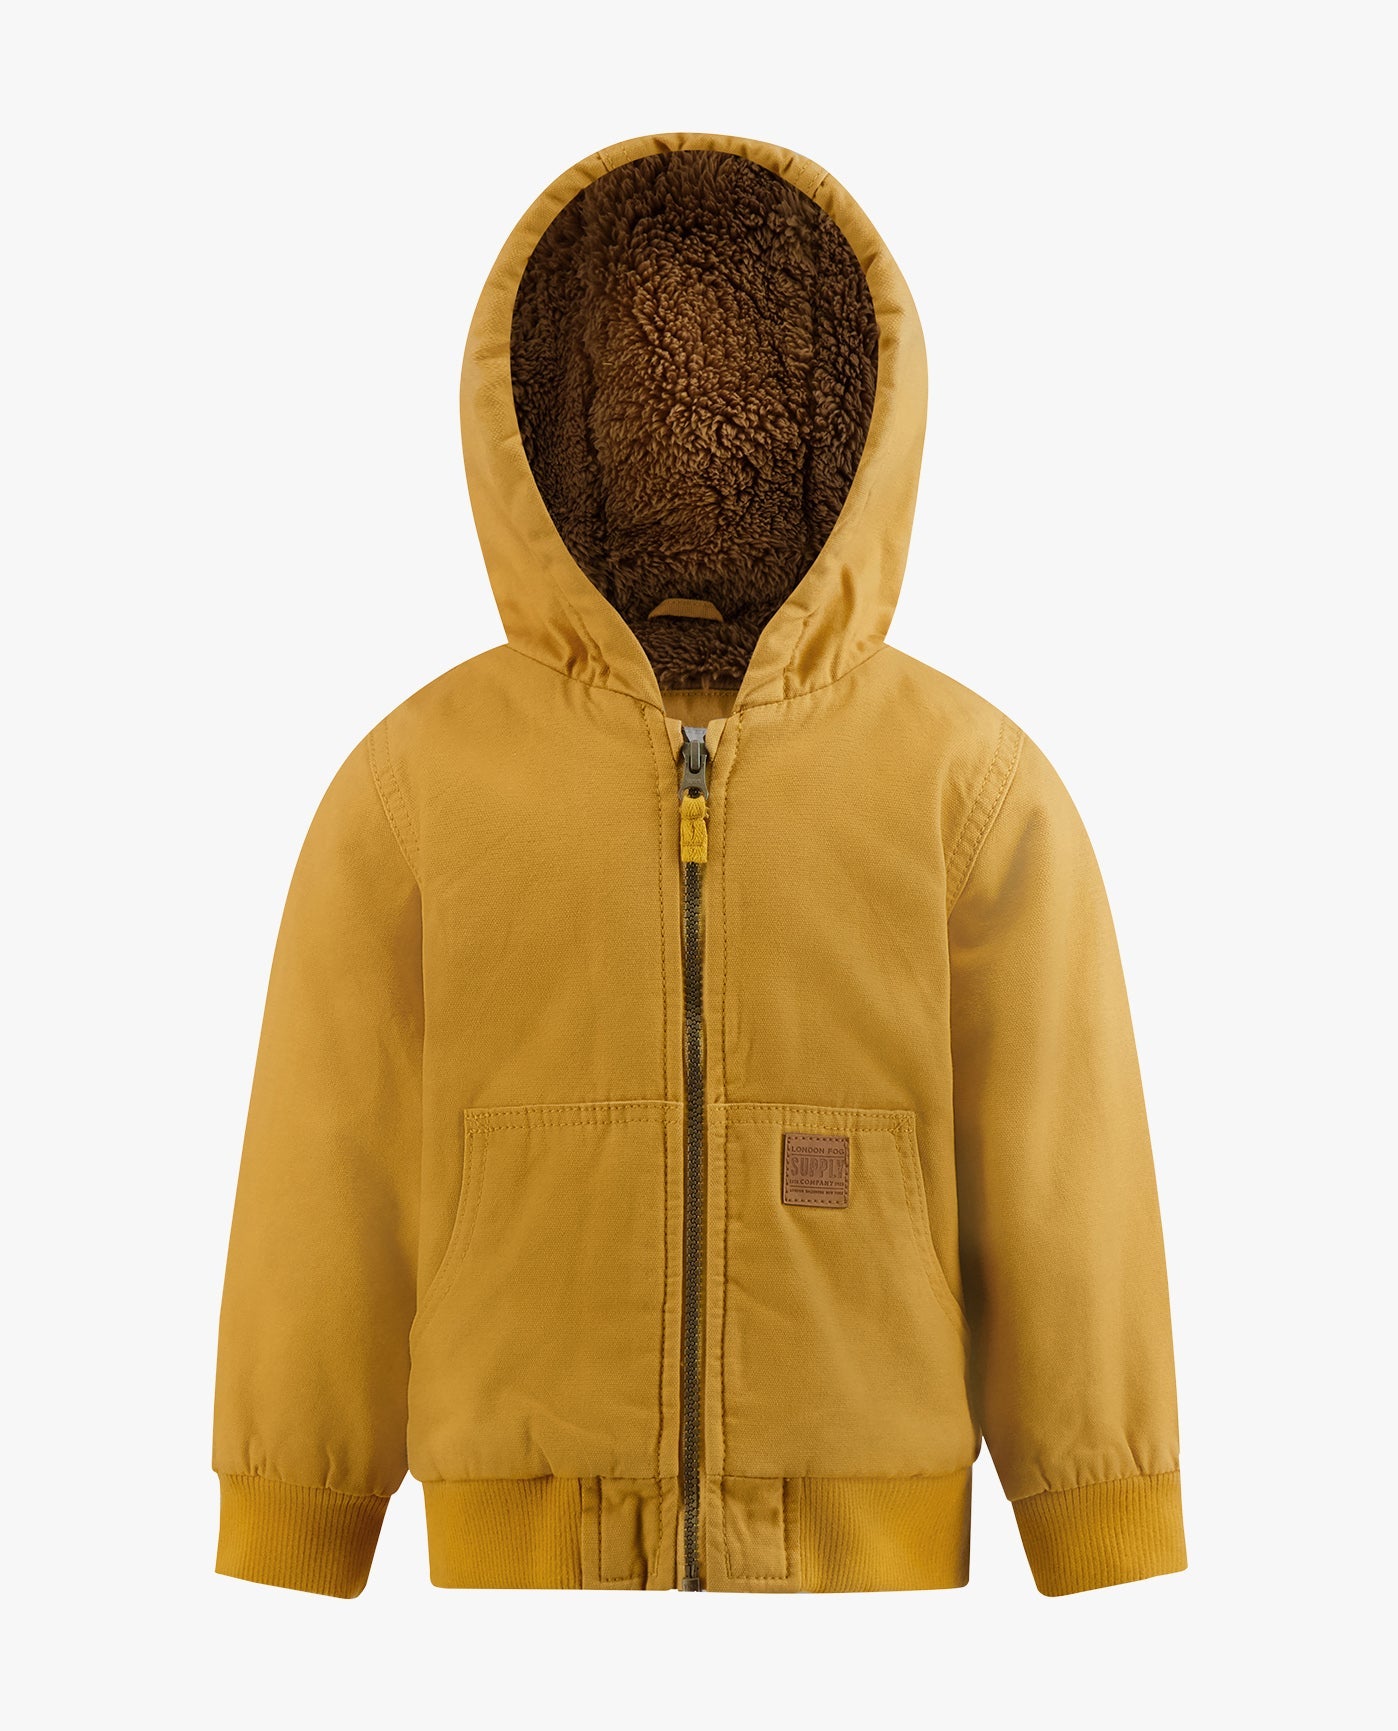 Detail View Of TODDLER BOYS ZIP-FRONT HOODED BOMBER | TAN